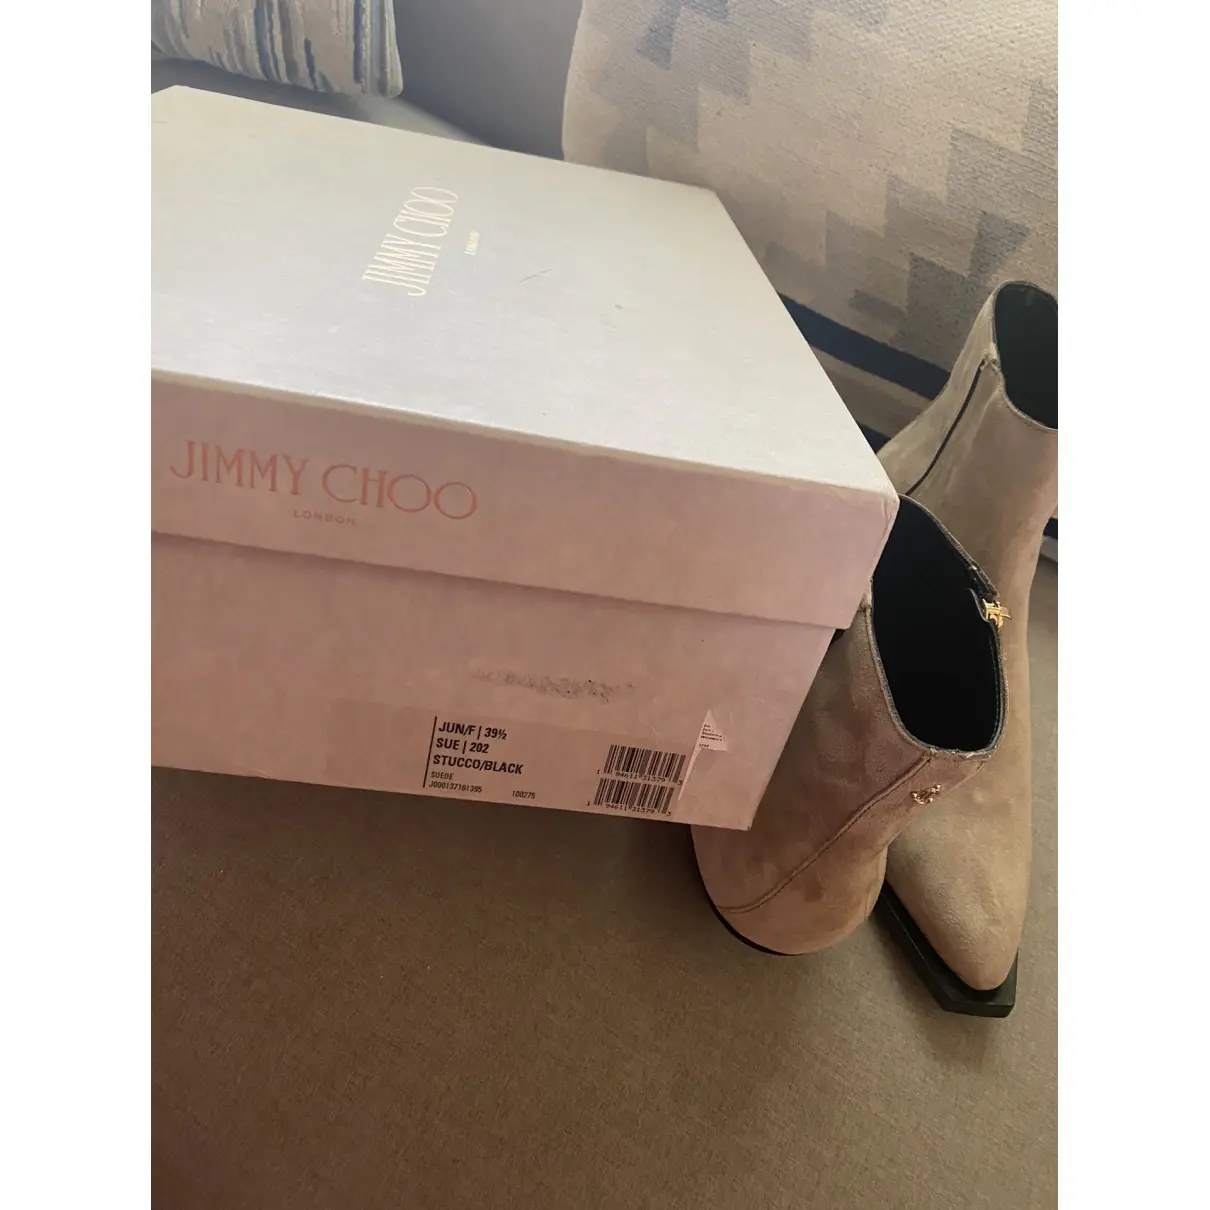 Buy Jimmy Choo Ankle boots online